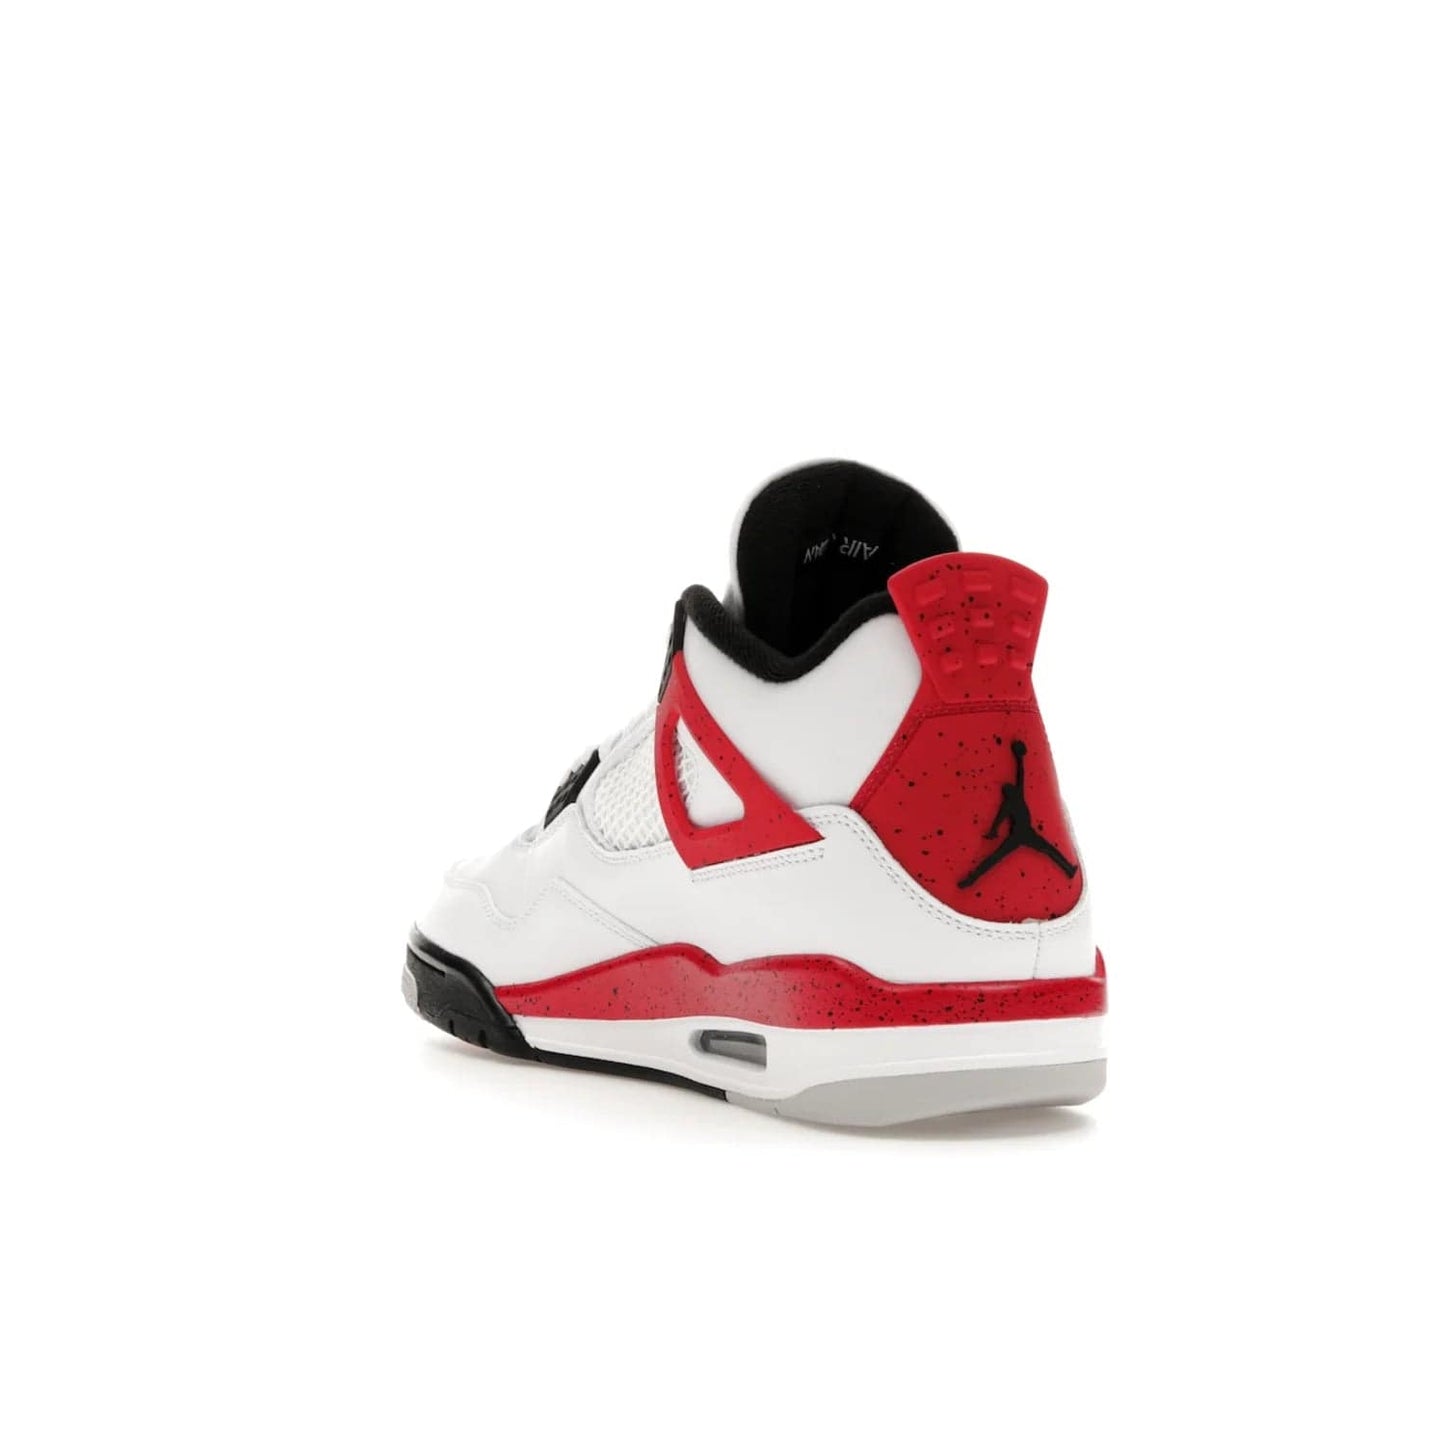 Jordan 4 Retro Red Cement - Image 25 - Only at www.BallersClubKickz.com - Iconic Jordan silhouette with a unique twist. White premium leather uppers with fire red and black detailing. Black, white, and fire red midsole with mesh detailing and Jumpman logo. Jordan 4 Retro Red Cement released with premium price.